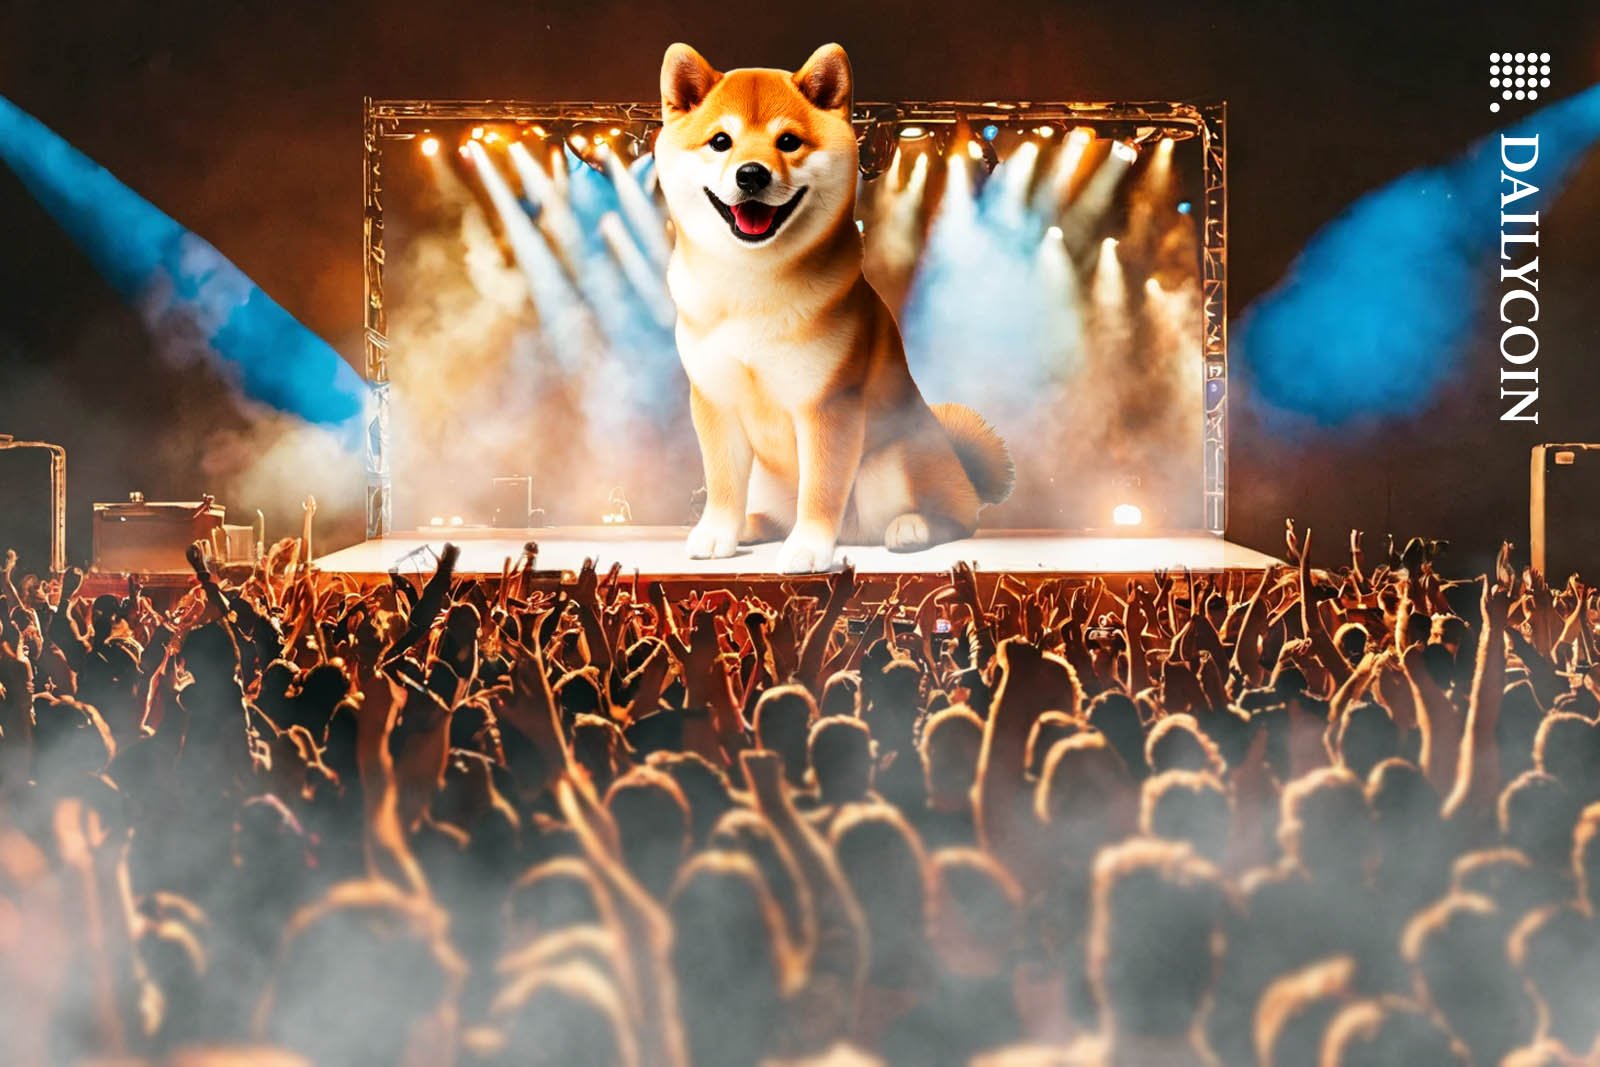 Shiba Inu sitting on a stage celebrated by thousands of people.